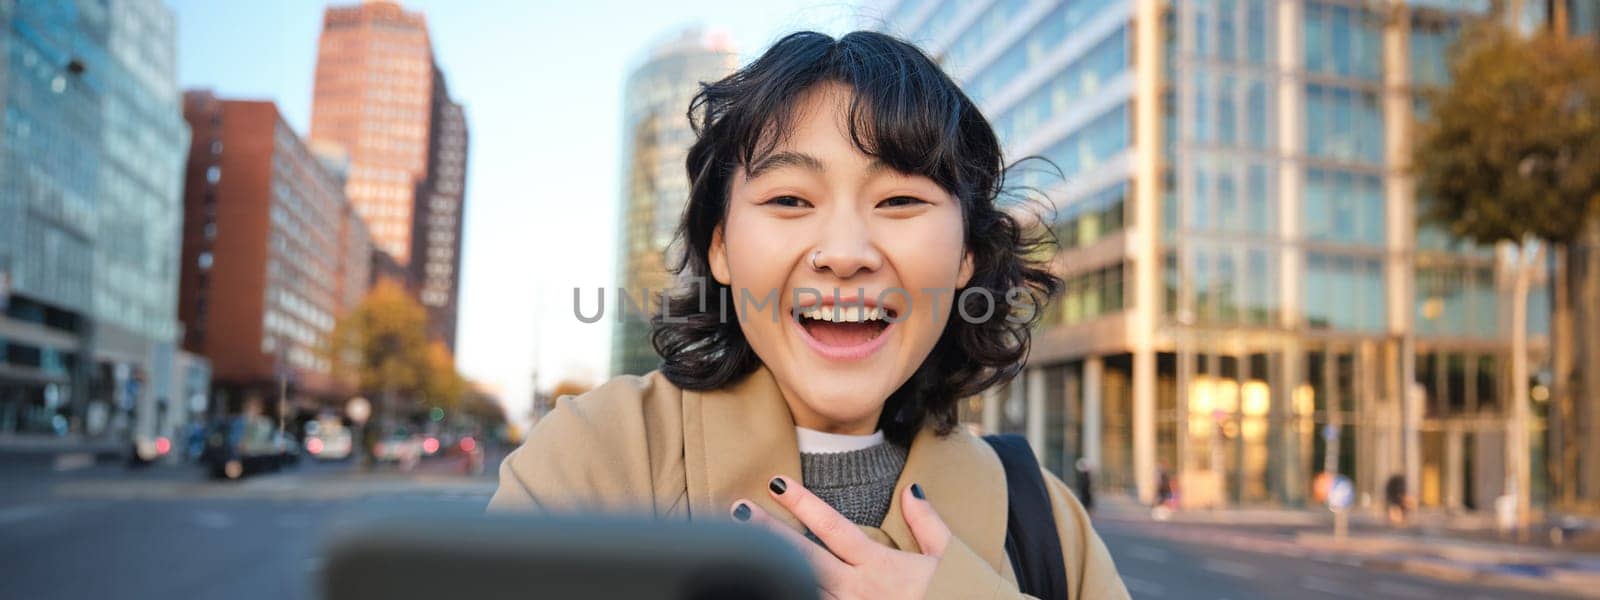 Image of korean girl video chats with smartphone, looks at her phone with surprised and amazed face, hears great news, stands on street.